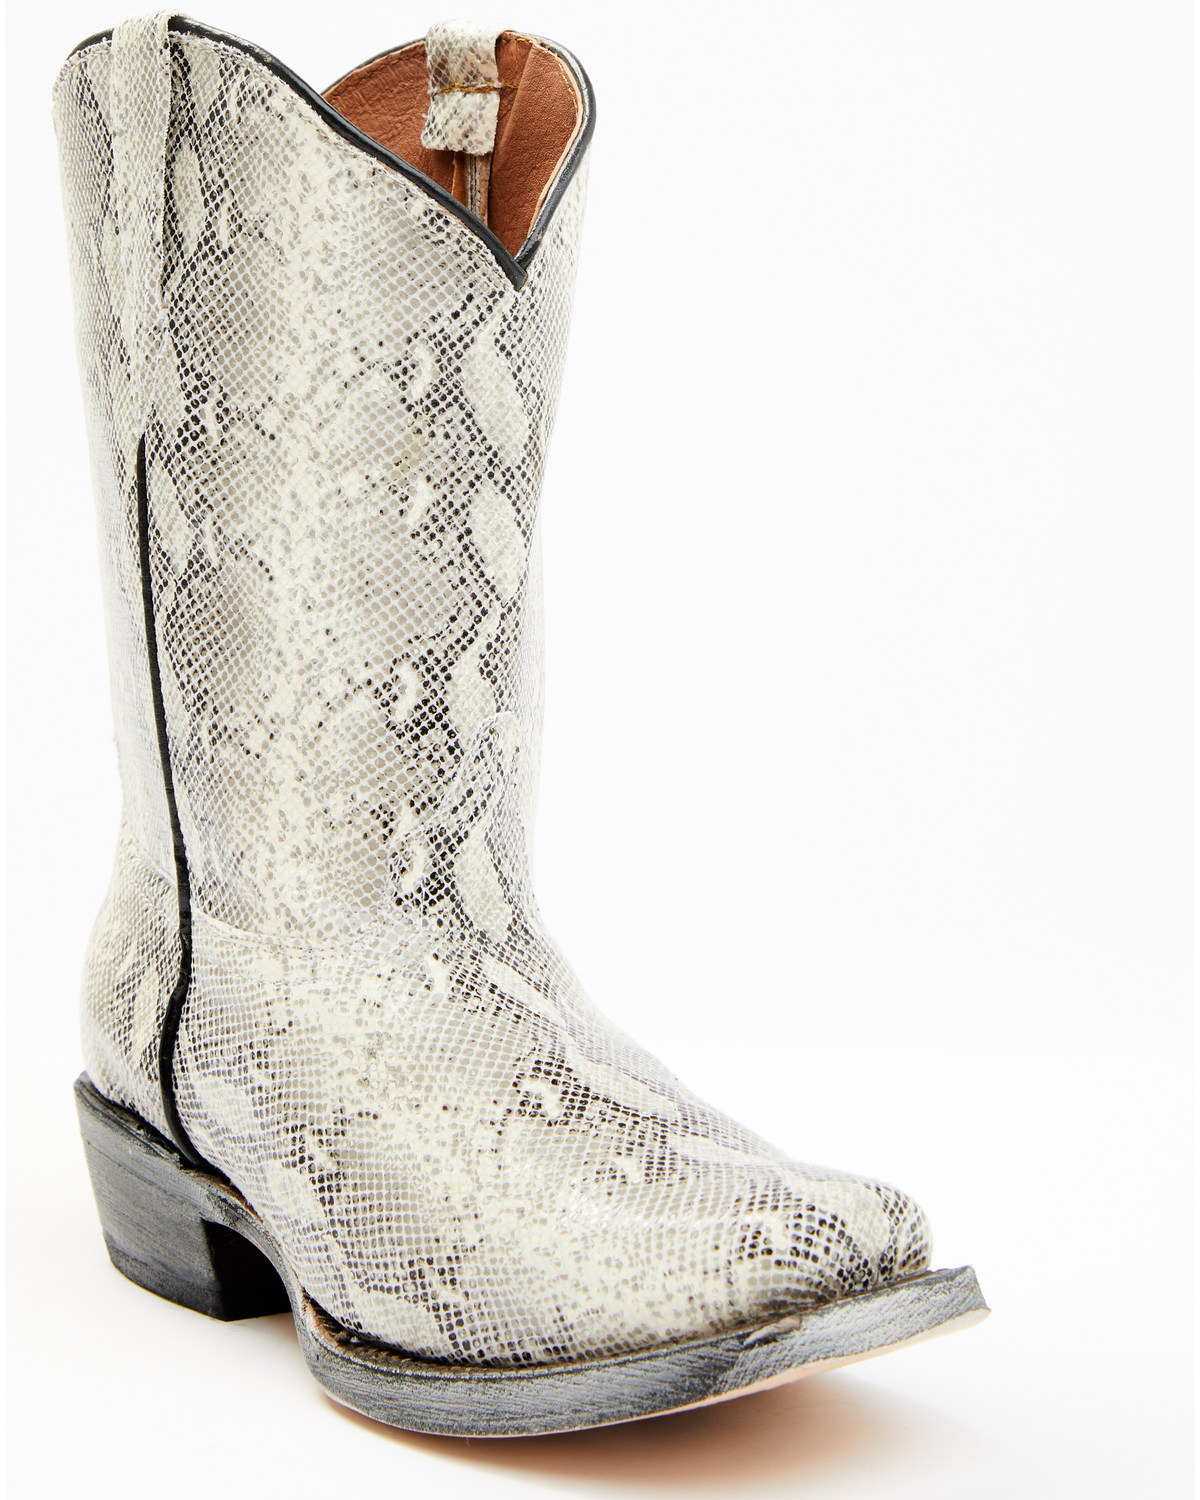 Tanner Mark Girls' Python Print Western Boots - Square Toe